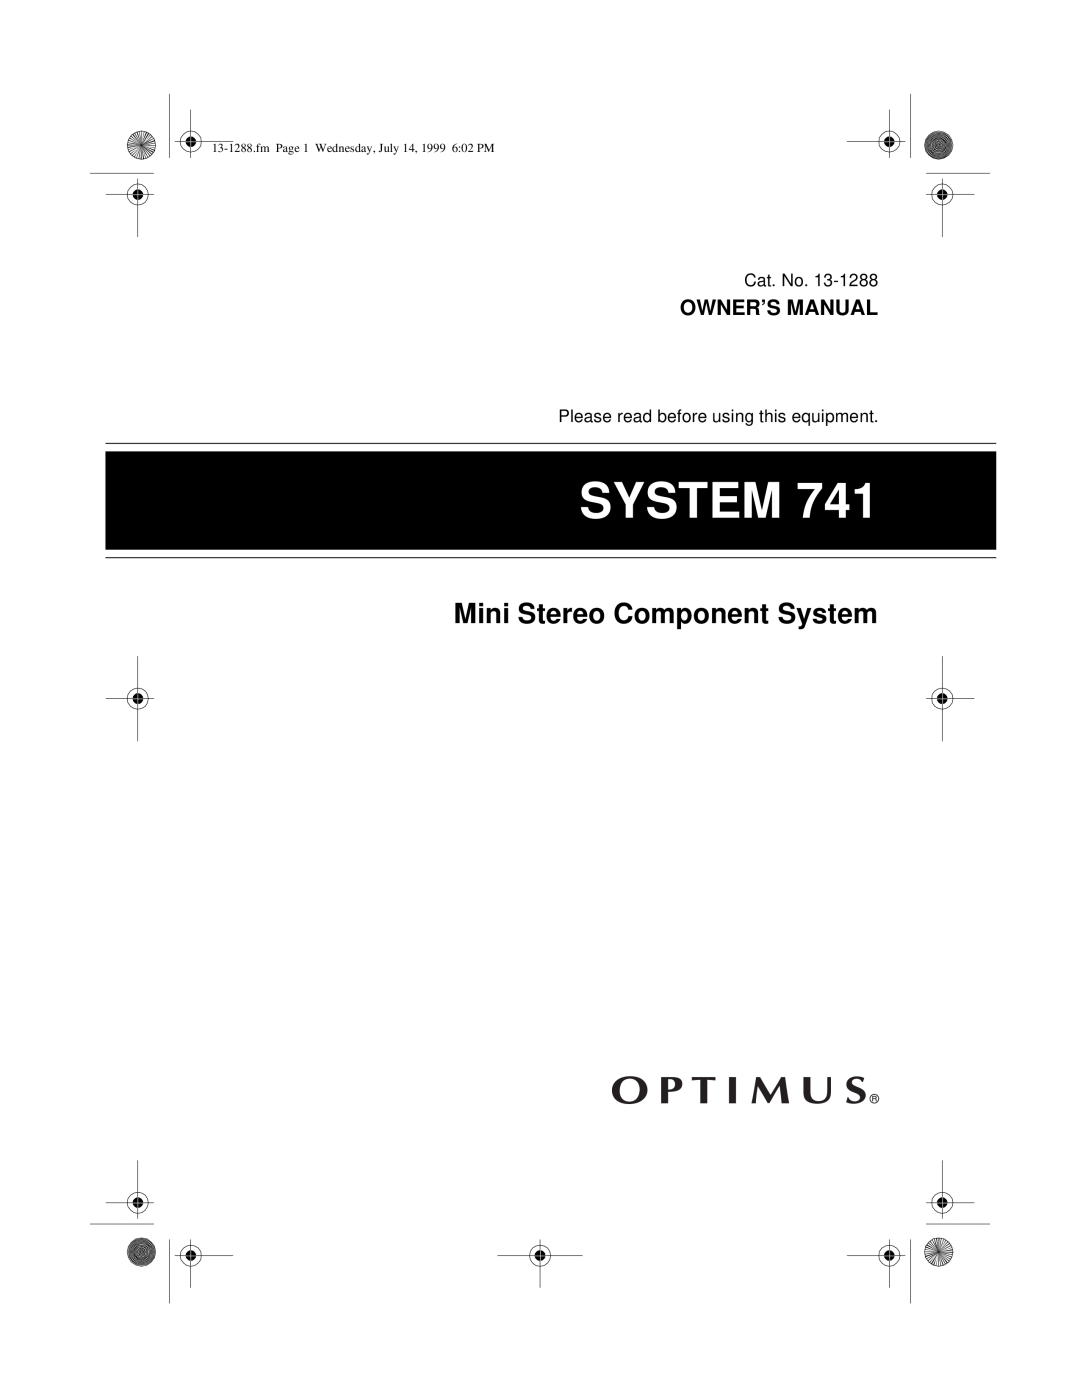 Optimus 13-1288 owner manual Mini Stereo Component System, fmPage 1 Wednesday, July 14, 1999 6 02 PM 